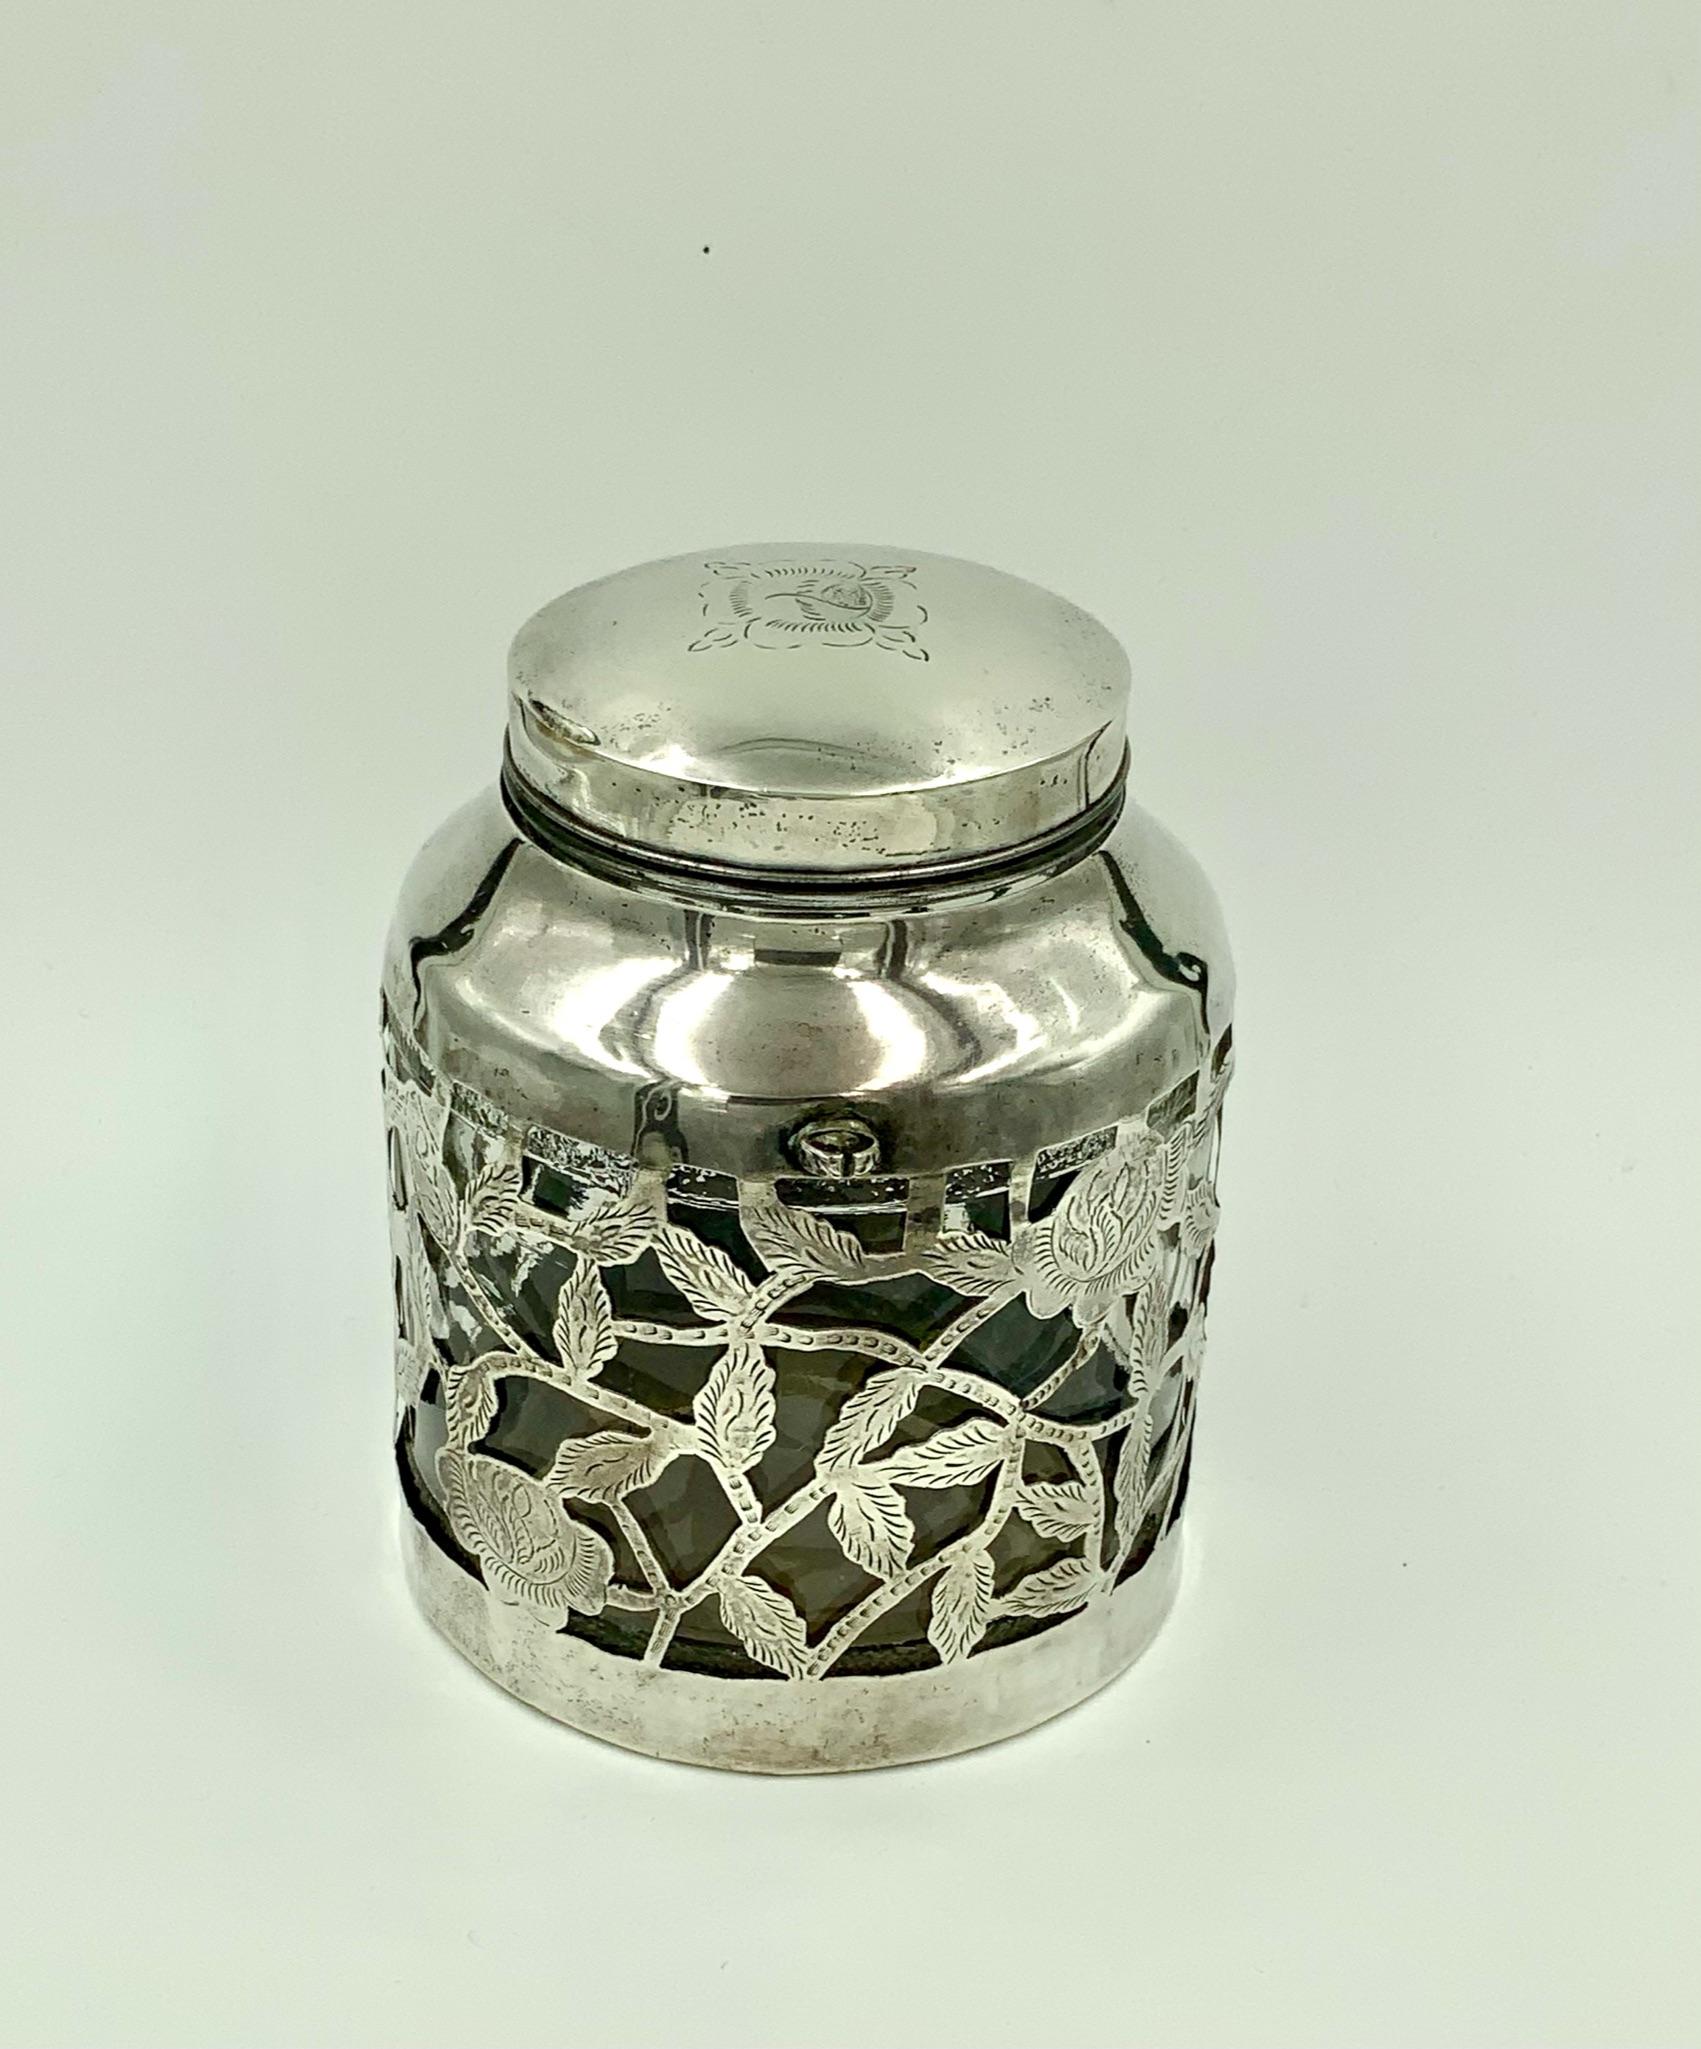 Mexican Floral Overlay Sterling Silver Stout Jar with Spoon Holder In Good Condition For Sale In Miami Beach, FL